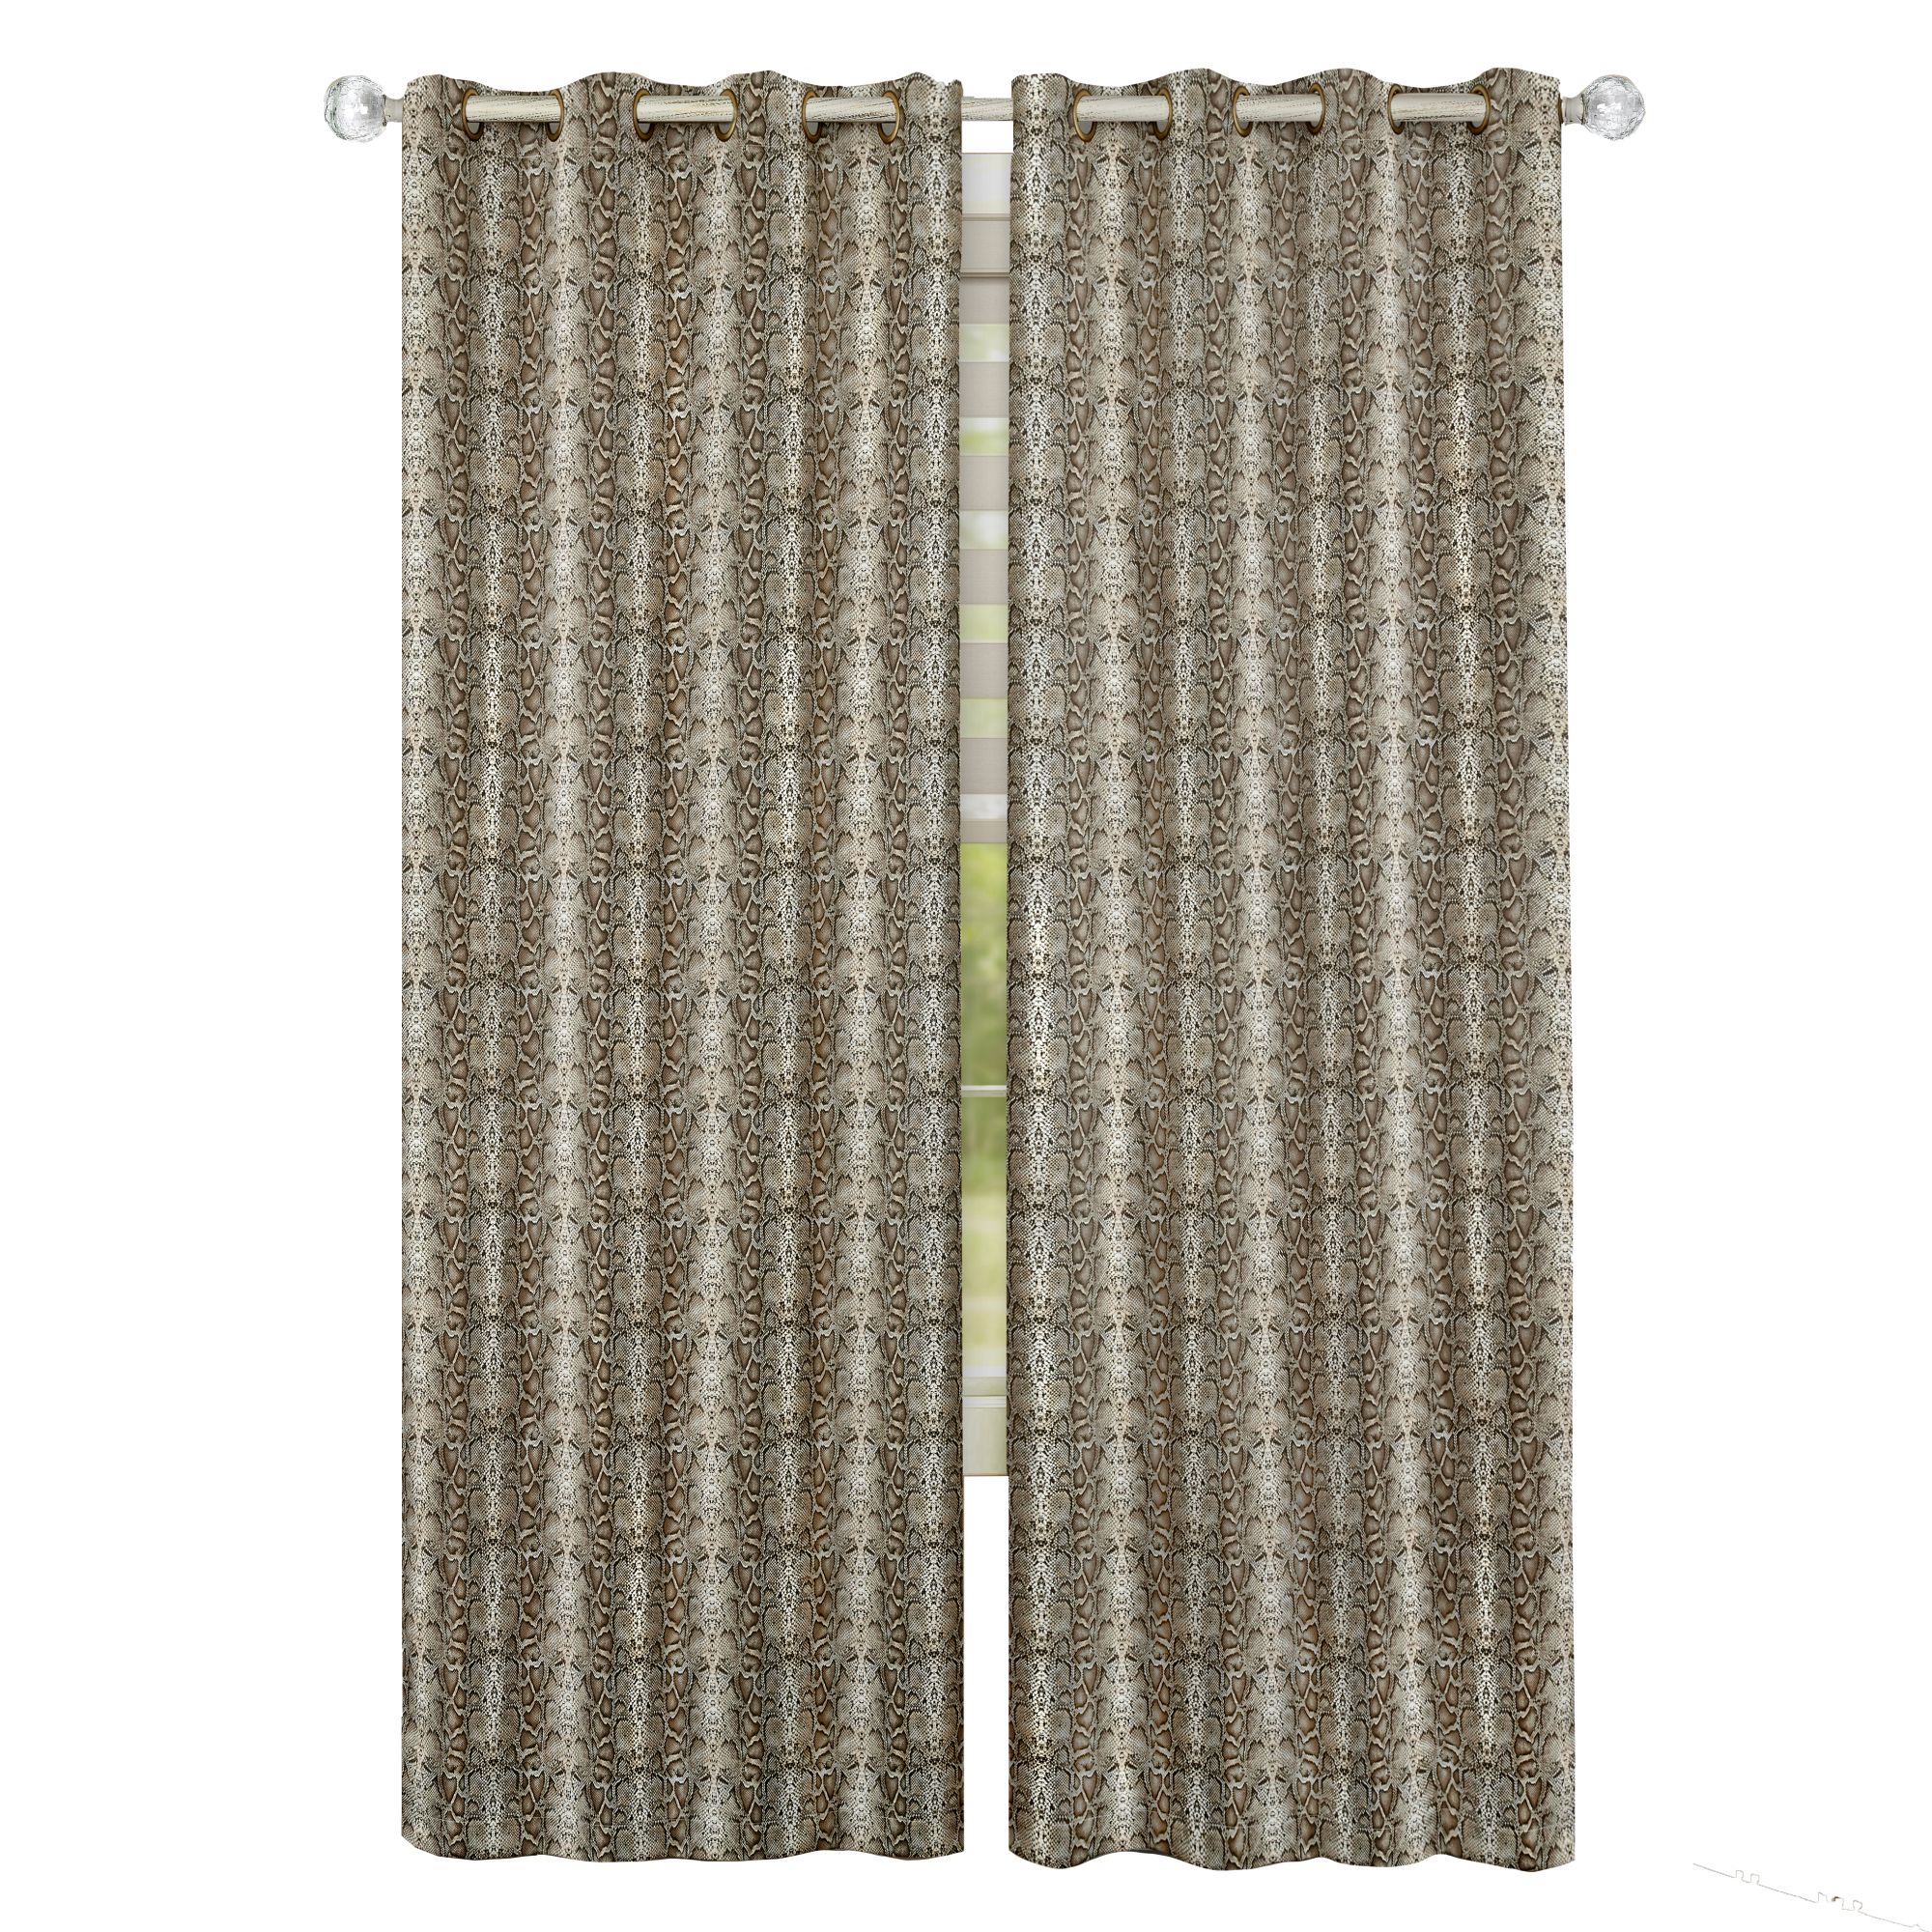 Achim Python Polyester Blackout Window Curtain Panel, Brown/Gold, 52" x 63" - image 2 of 5